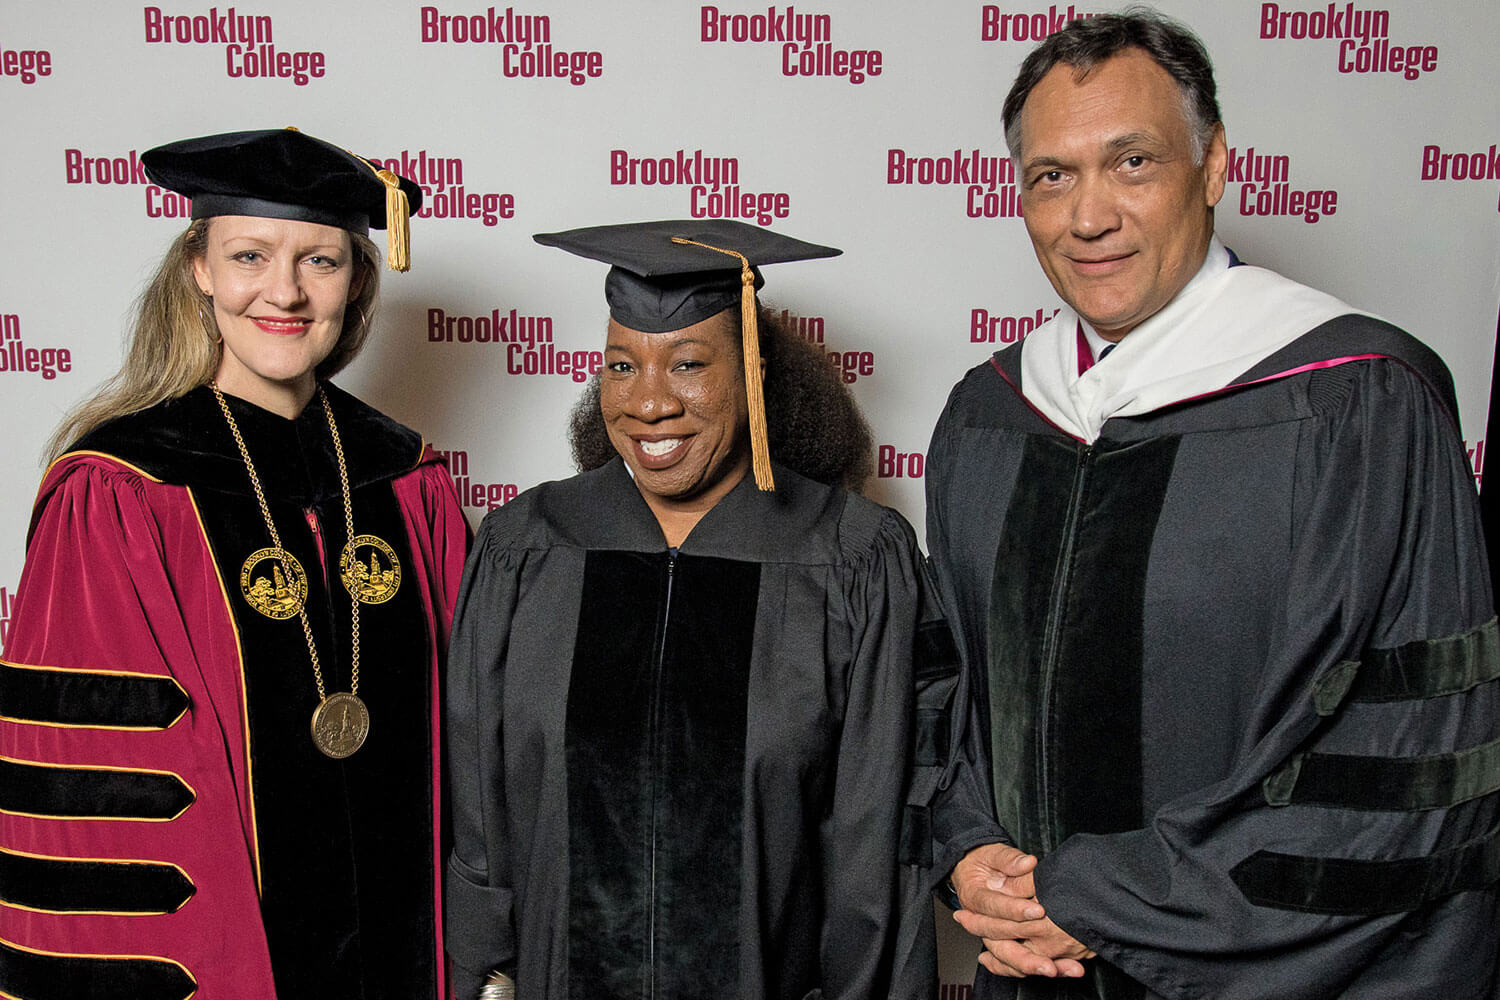 Brooklyn College President Michelle J. Anderson with keynote speaker and recipient of the Honorary Doctor of Humane Letters Tarana J. Burke and Distinguished Alumnus Jimmy Smits ‘80